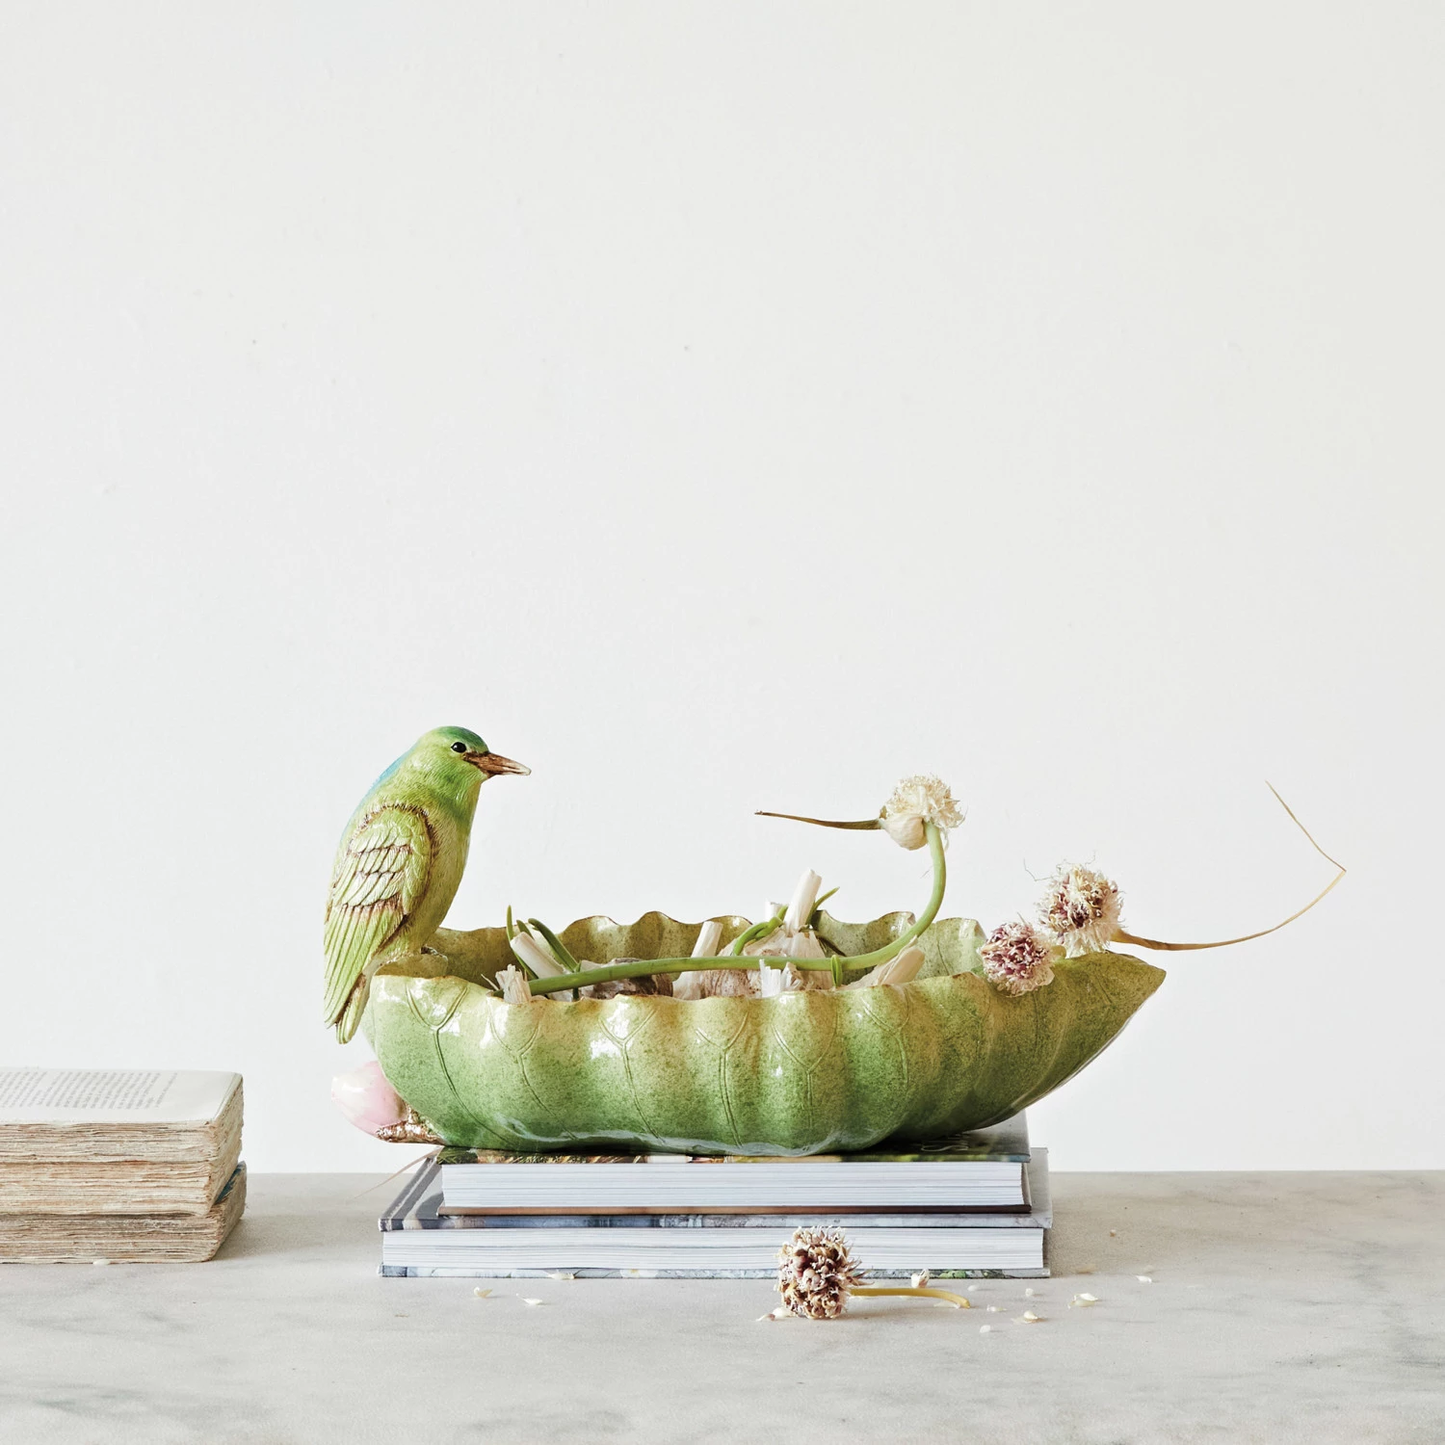 Decorative Resin Leaf Shaped Bowl with Bird